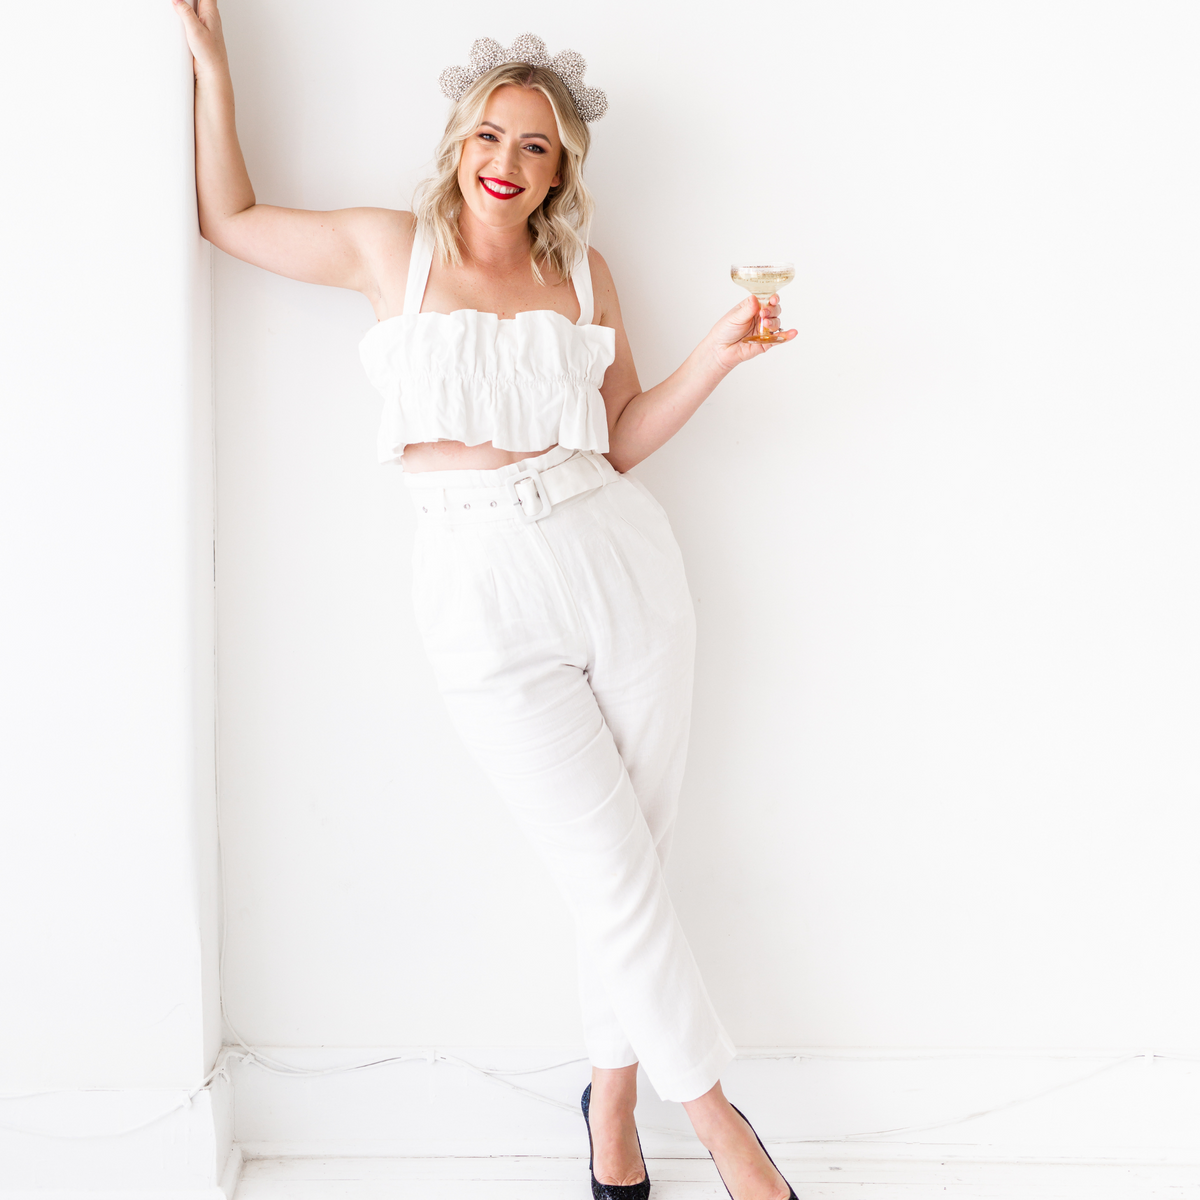 Silver Francesca Crown modelled on the head of a female in a white suit. She is holding a champagne glass and leaning casually against a white wall.